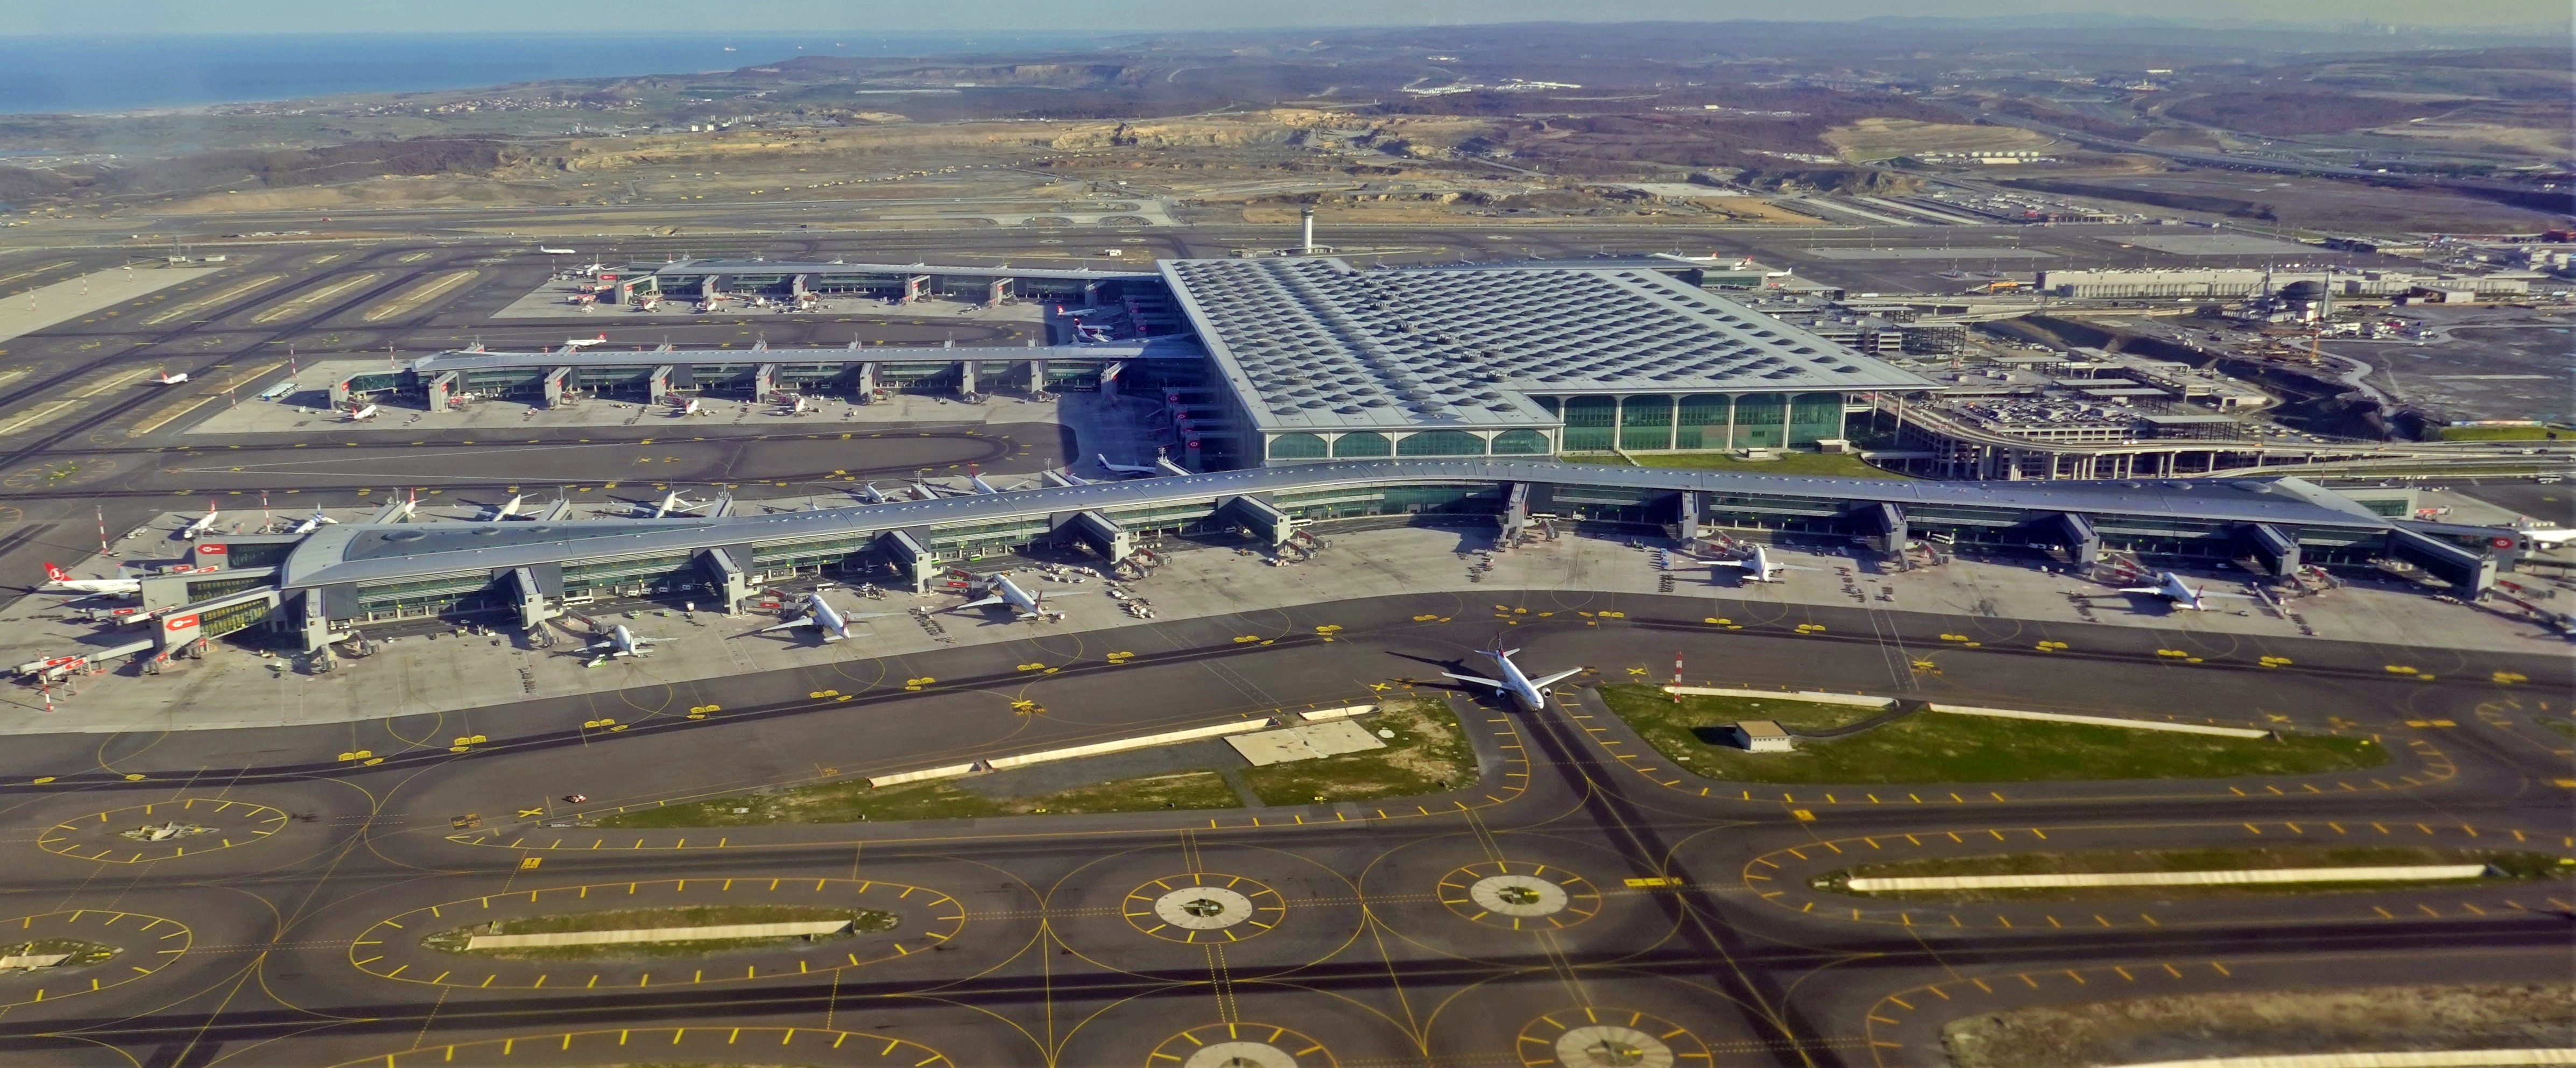 This airport is already leading Europe - now it wants to lead the world